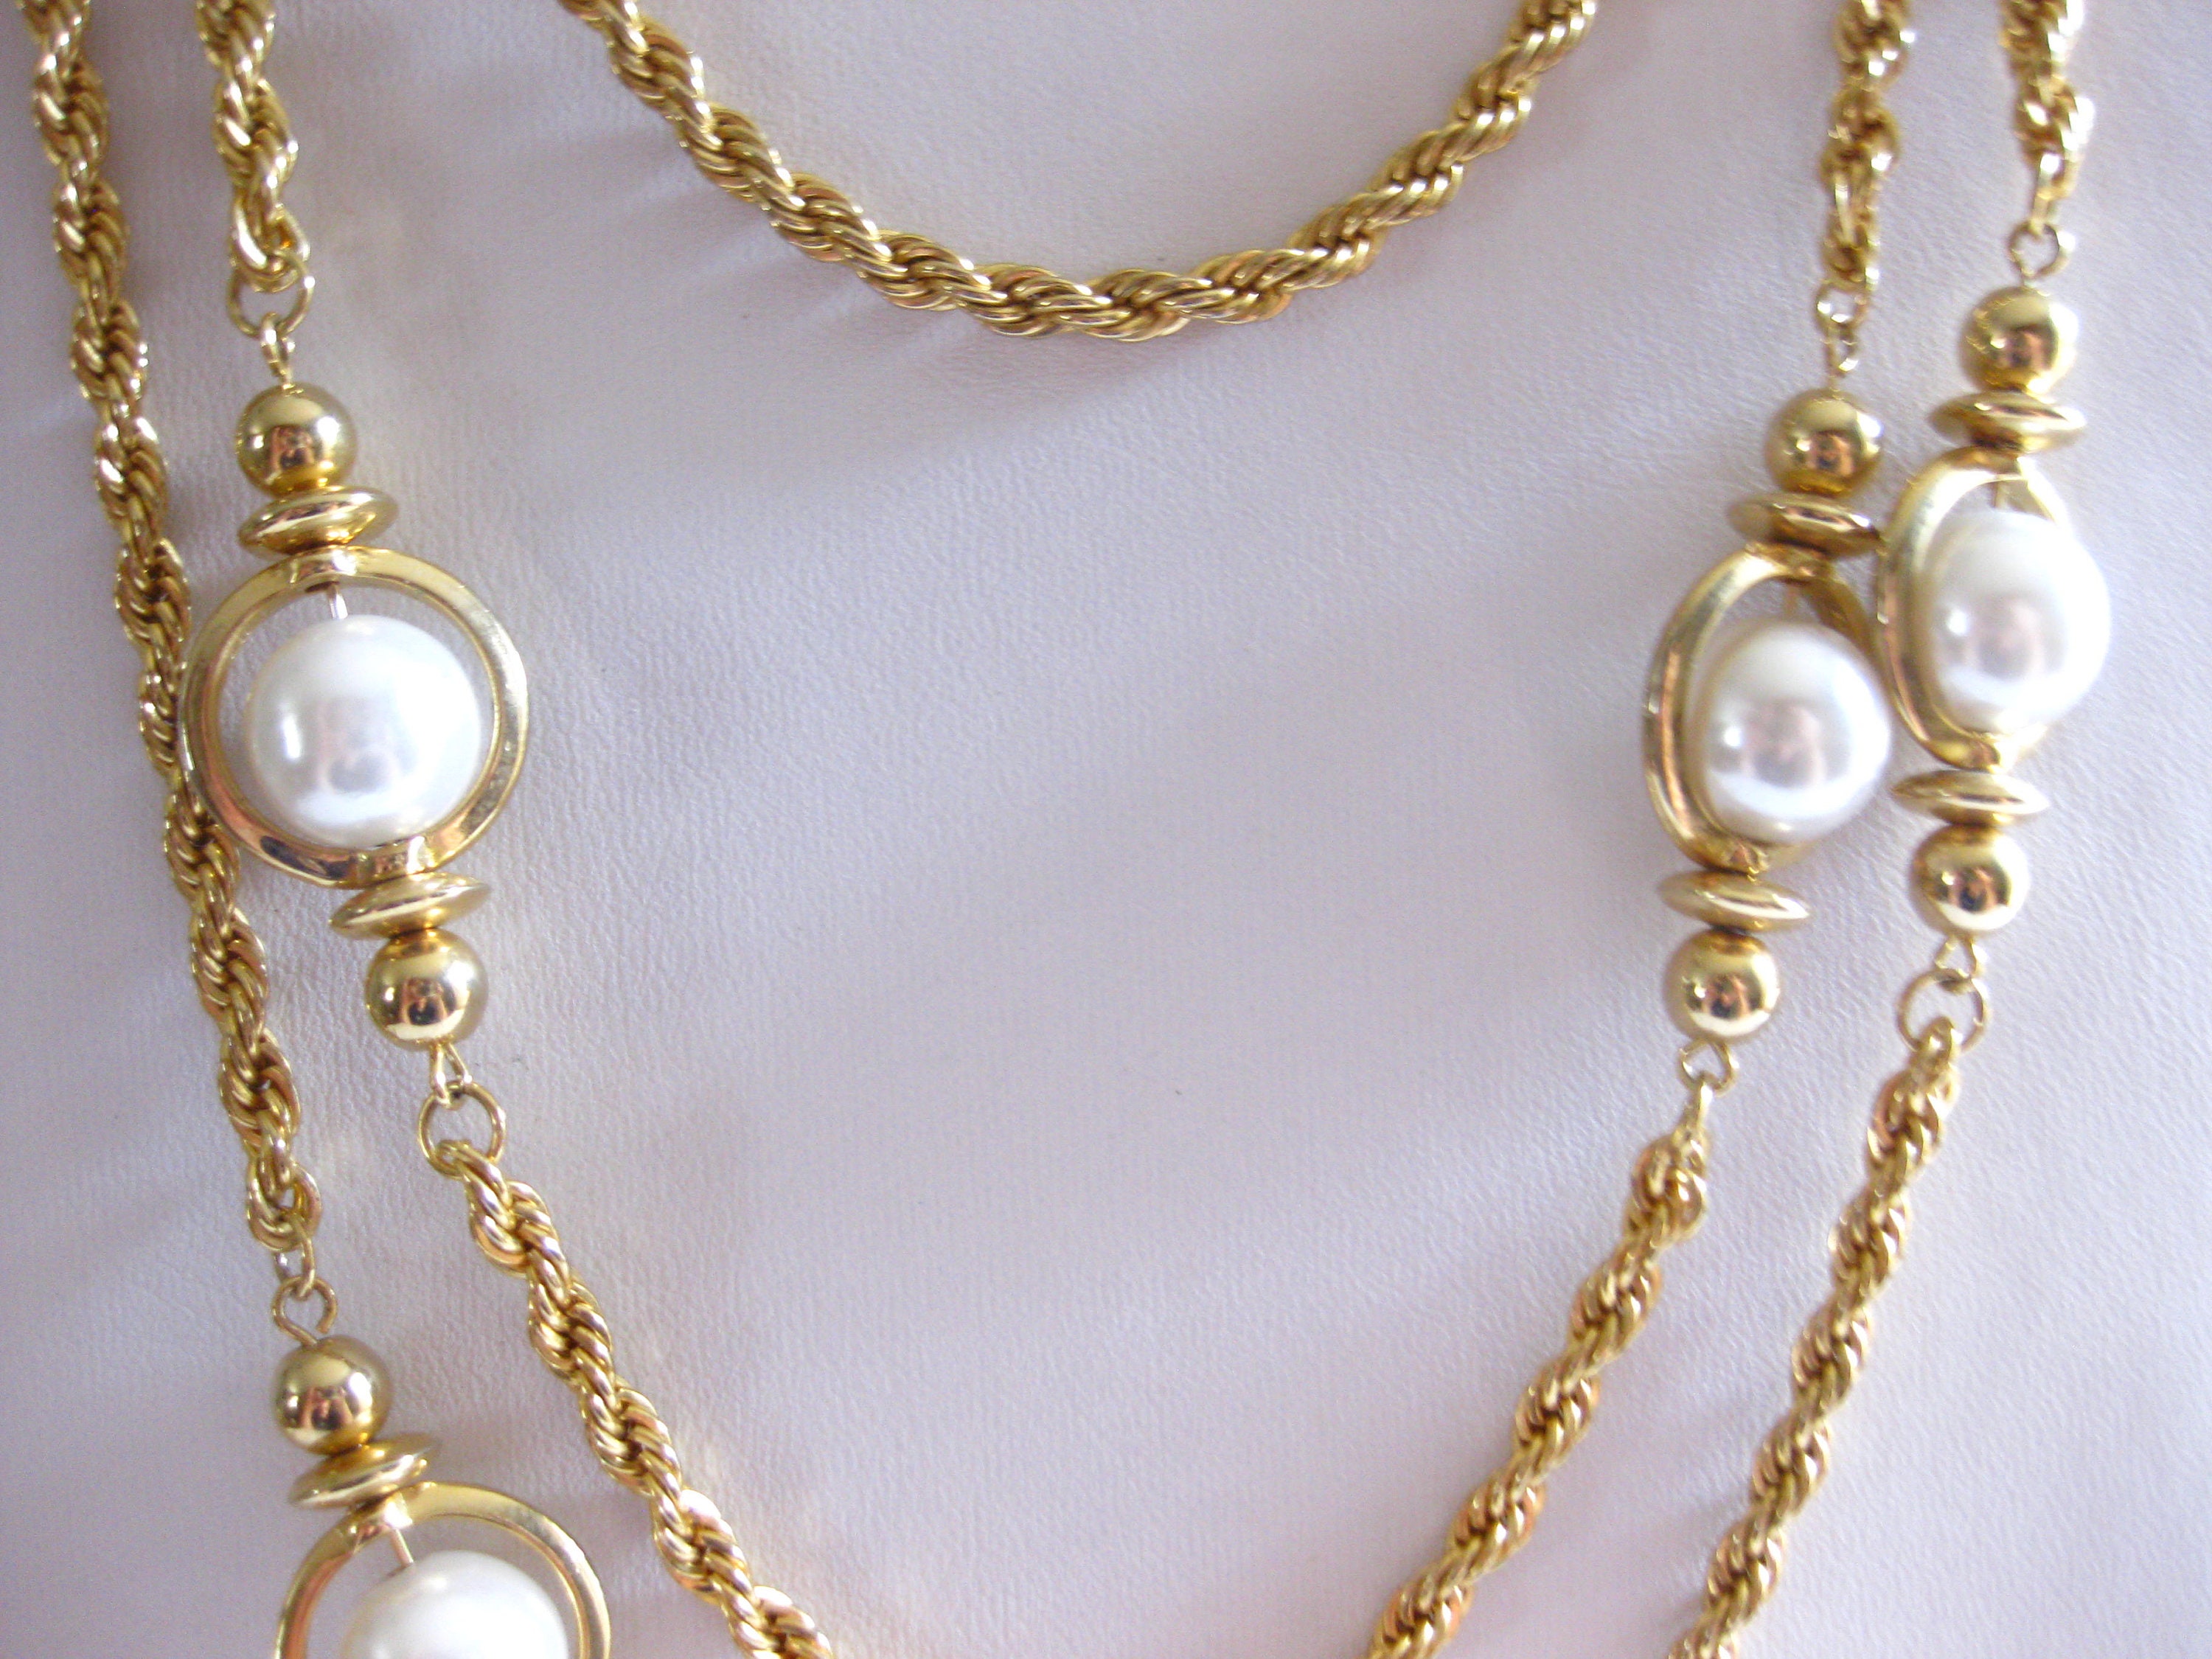 Necklace Caged Pearl Beads Gold Chain Long 56 Vintage